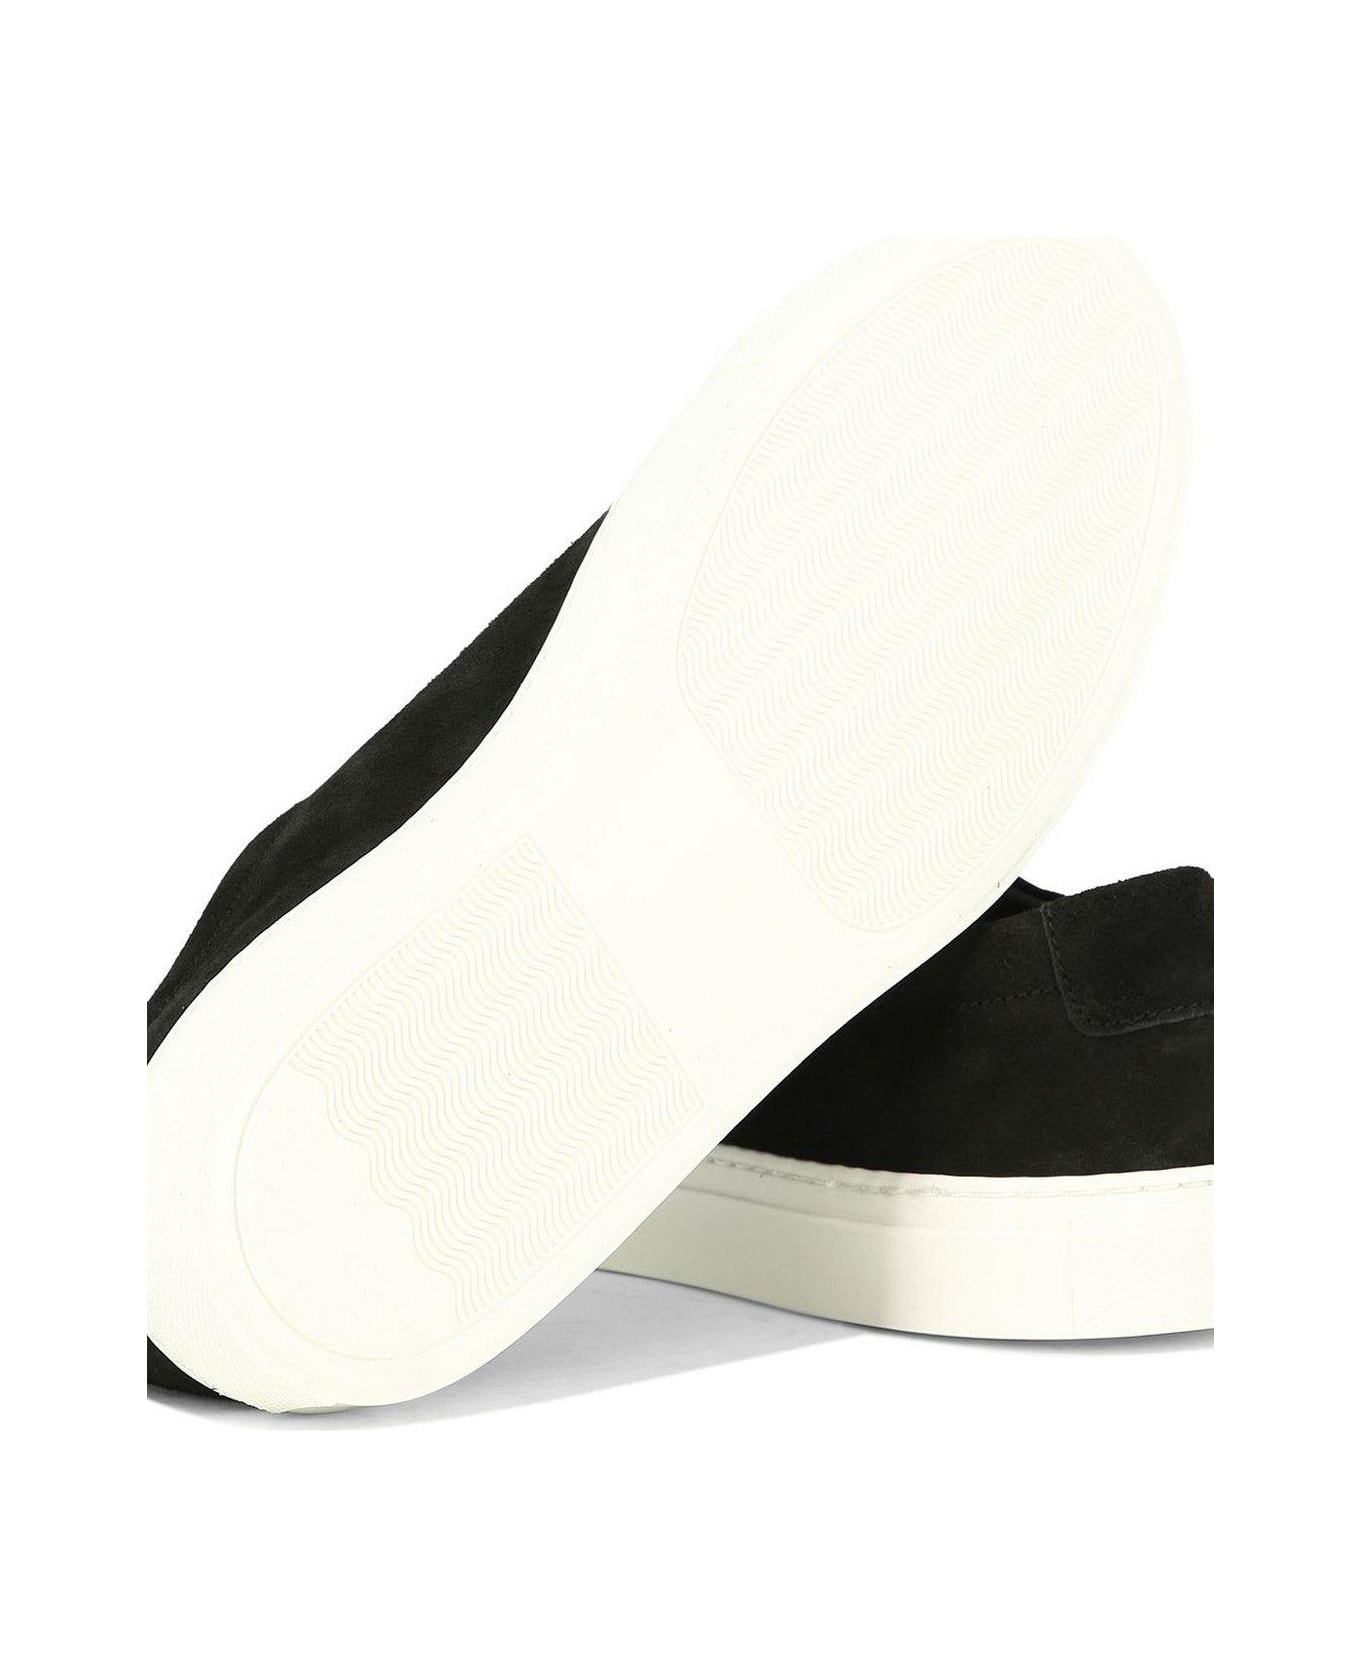 Common Projects Achilles Sneakers In Black Suede - Black